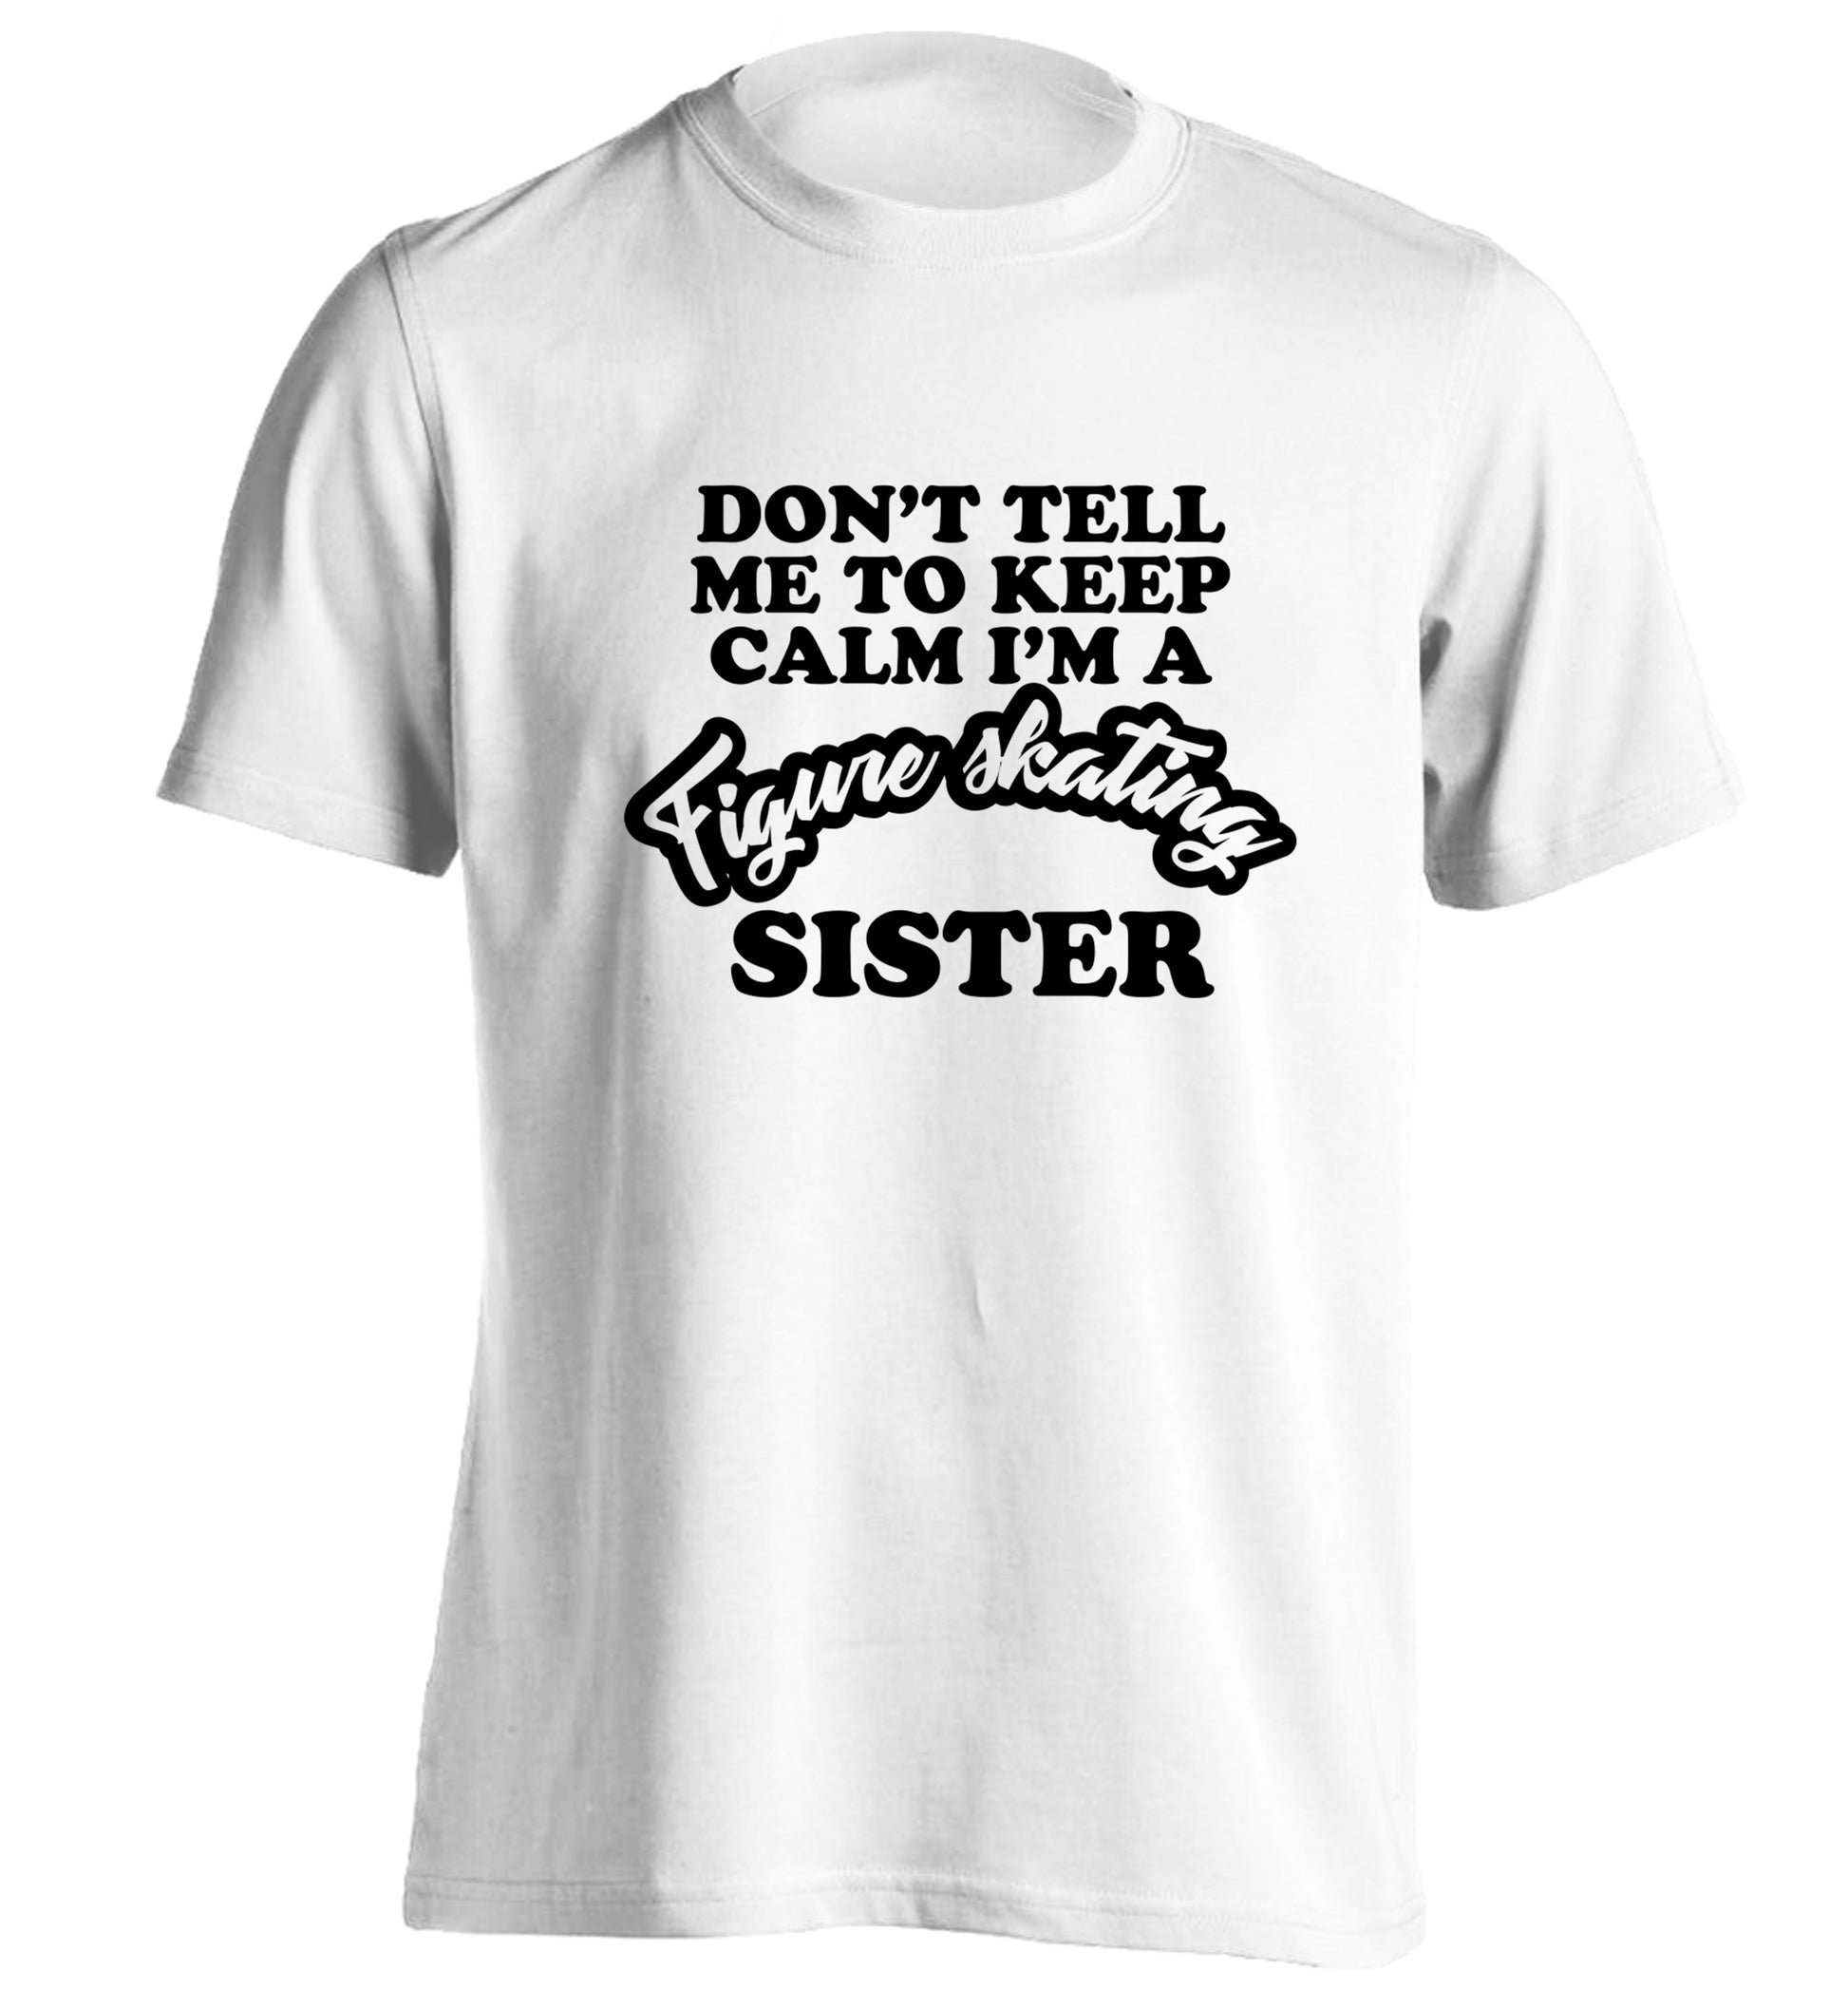 Don't tell me to keep calm I'm a figure skating sister adults unisexwhite Tshirt 2XL